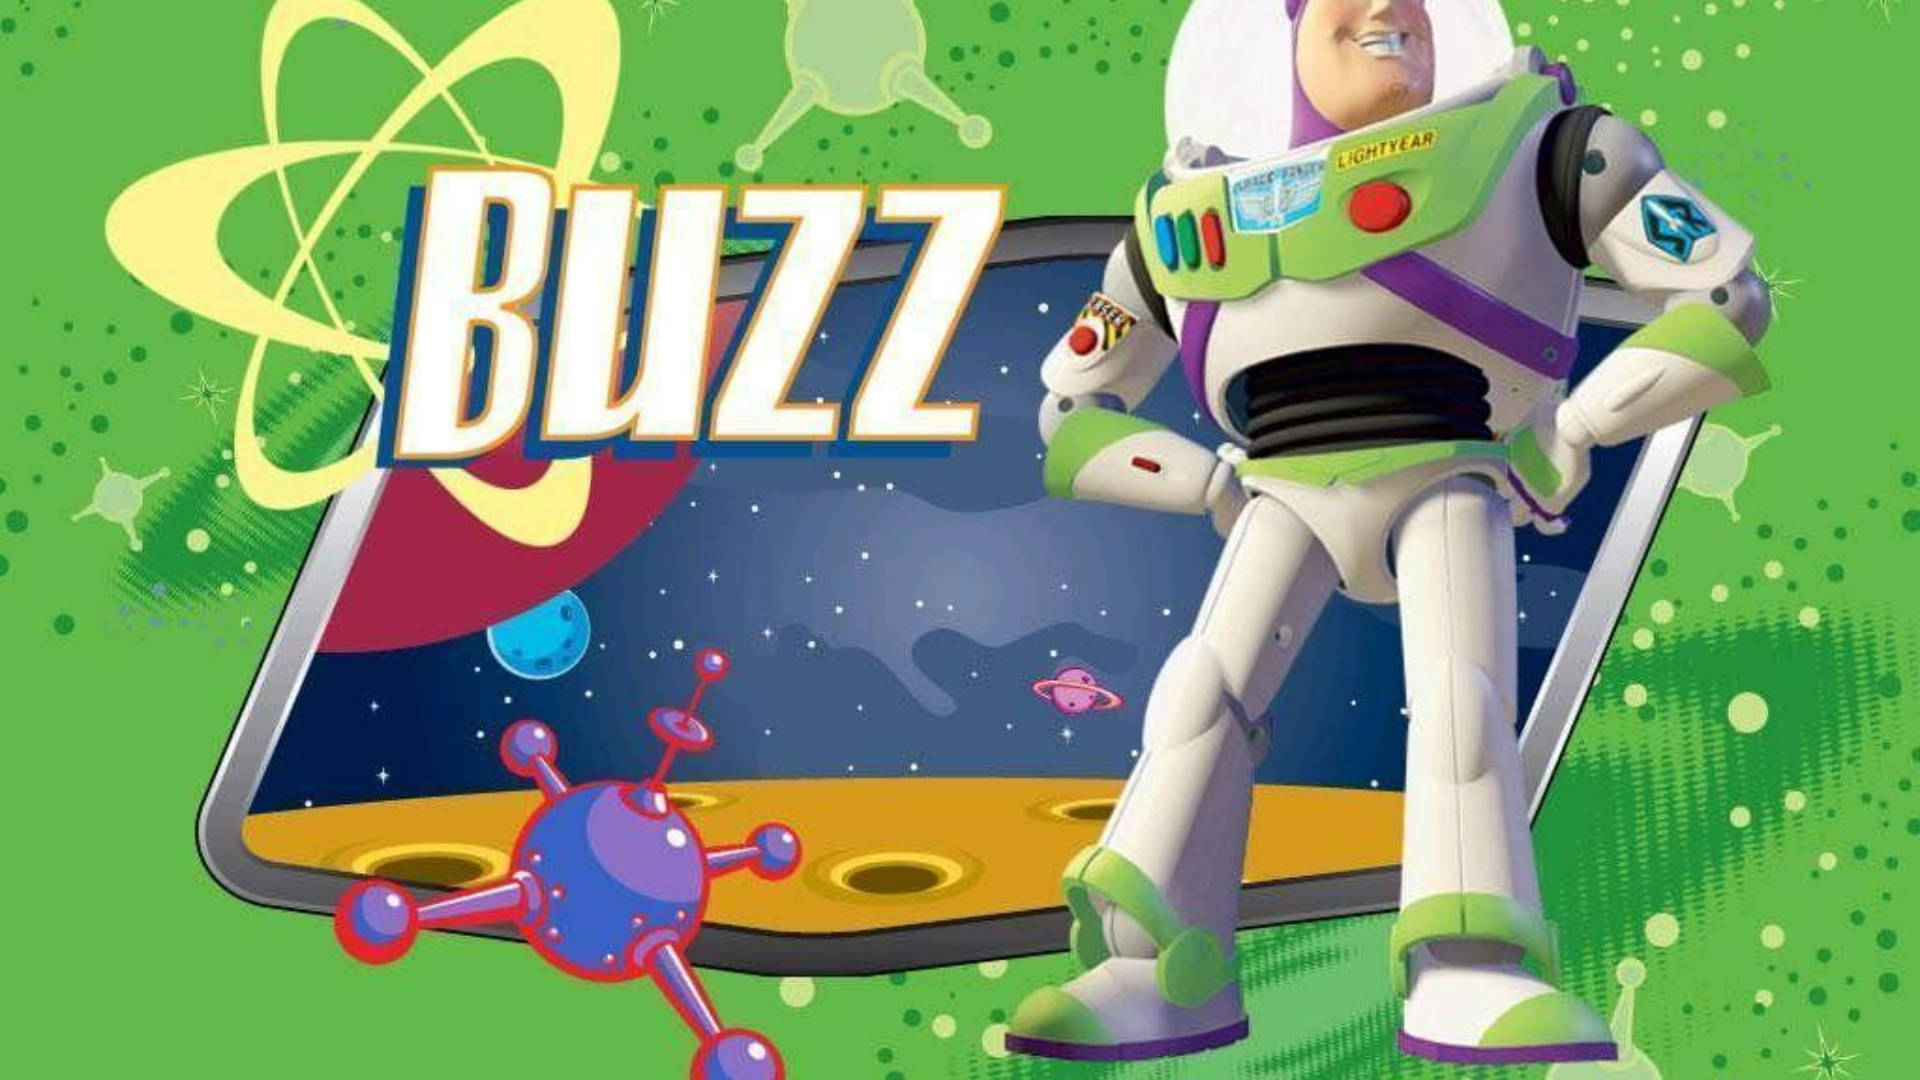 Buzz Lightyear animated series poster showcasing the Space Ranger in action Wallpaper